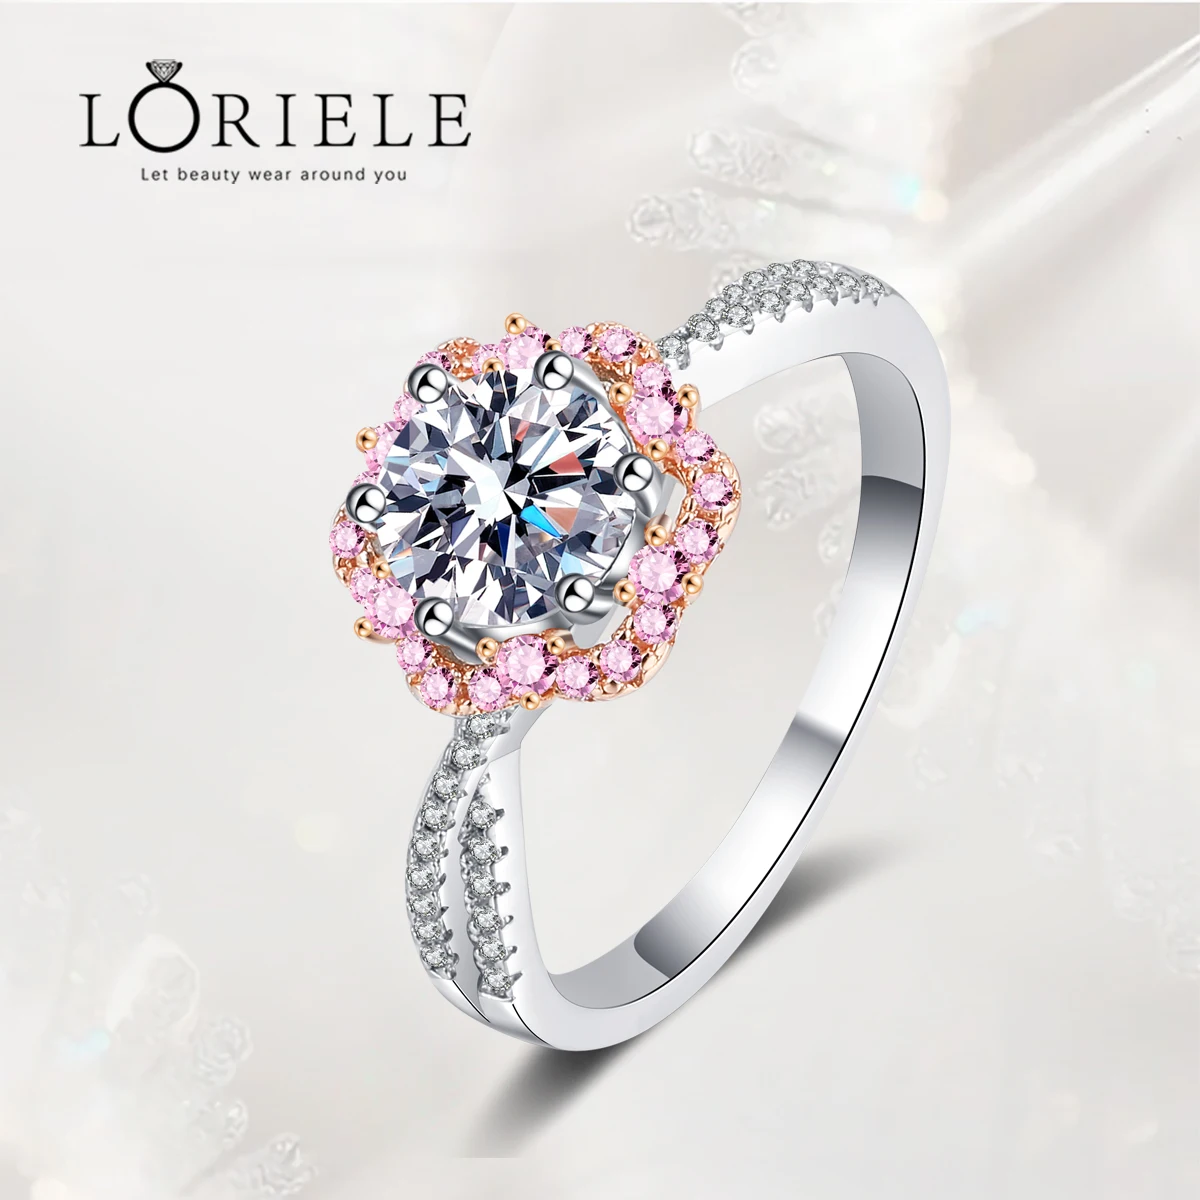 

LORIELE Halo Round Cut Engagement Rings for Women 1Ct Center Moissanite Rings Silver Wedding Anniversary Promise Rings for Women